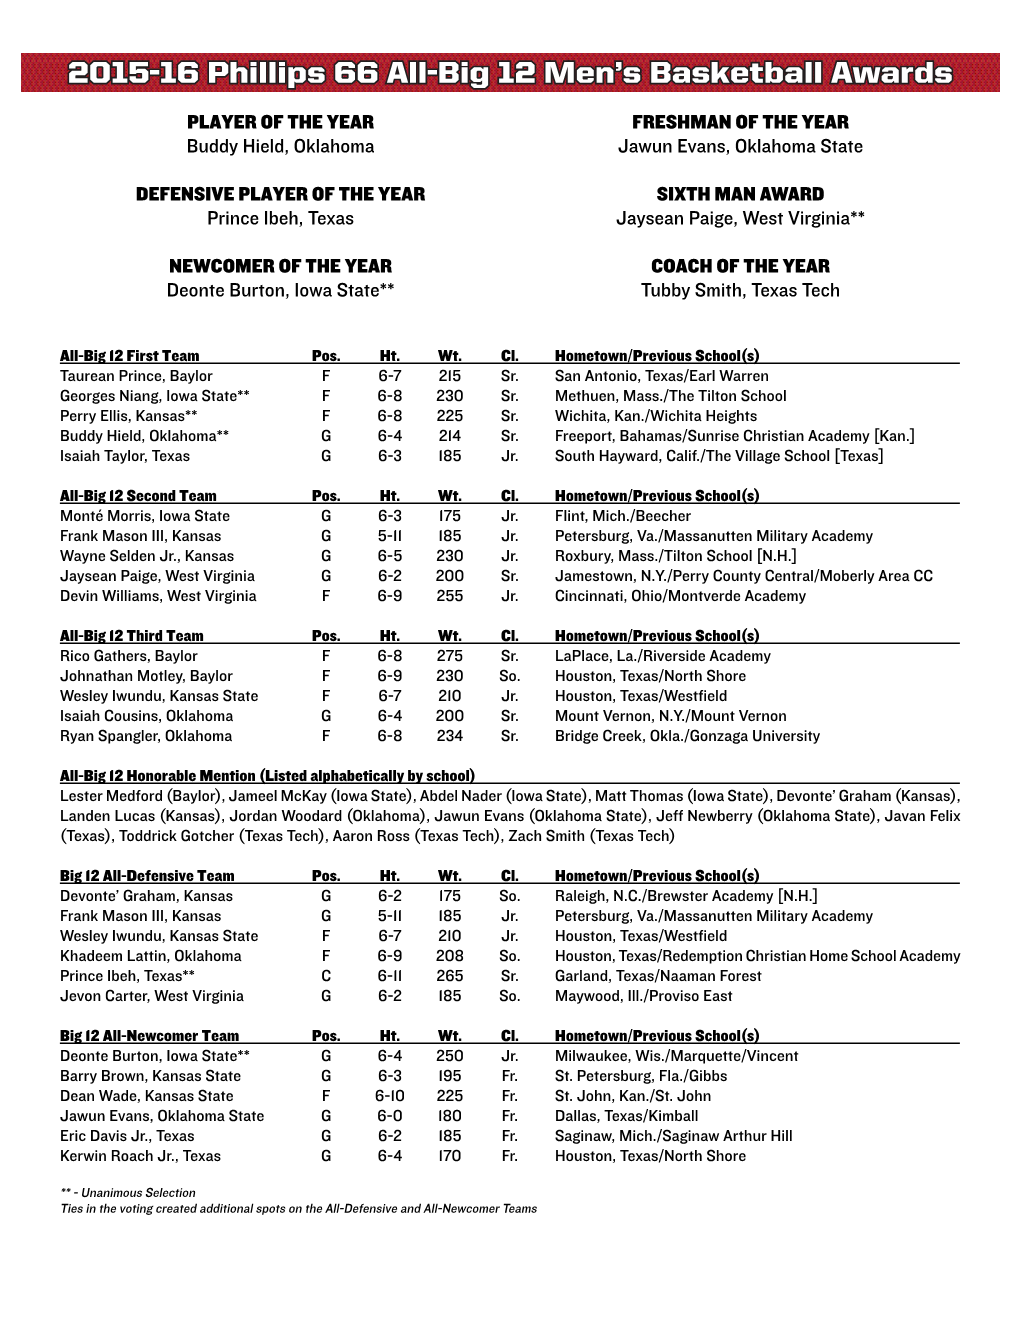 All-Big 12 Awards Release